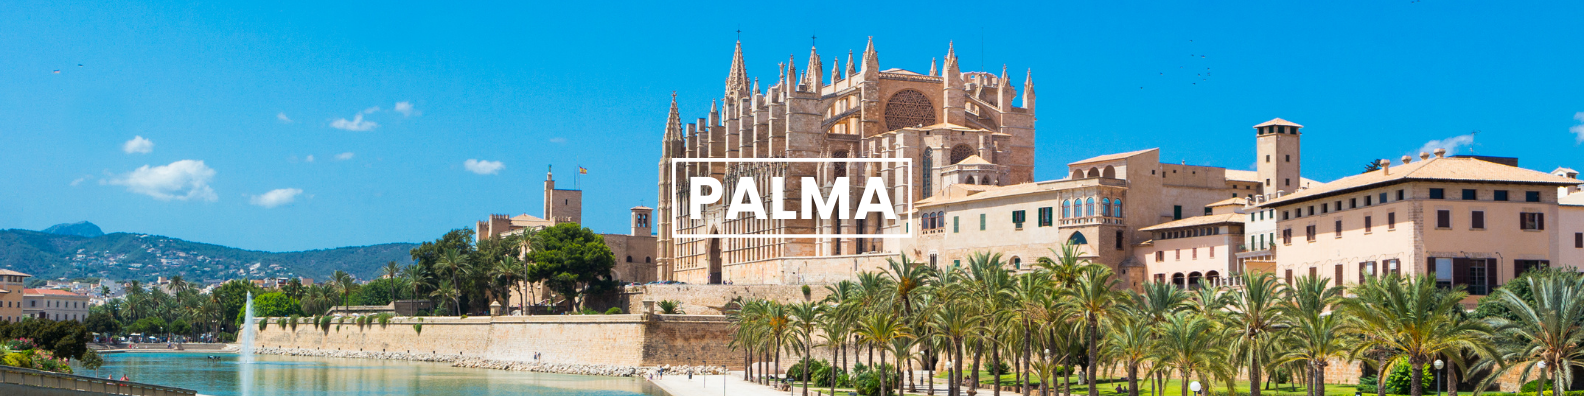 a large building with the word palma on it is surrounded by palm trees and a river .